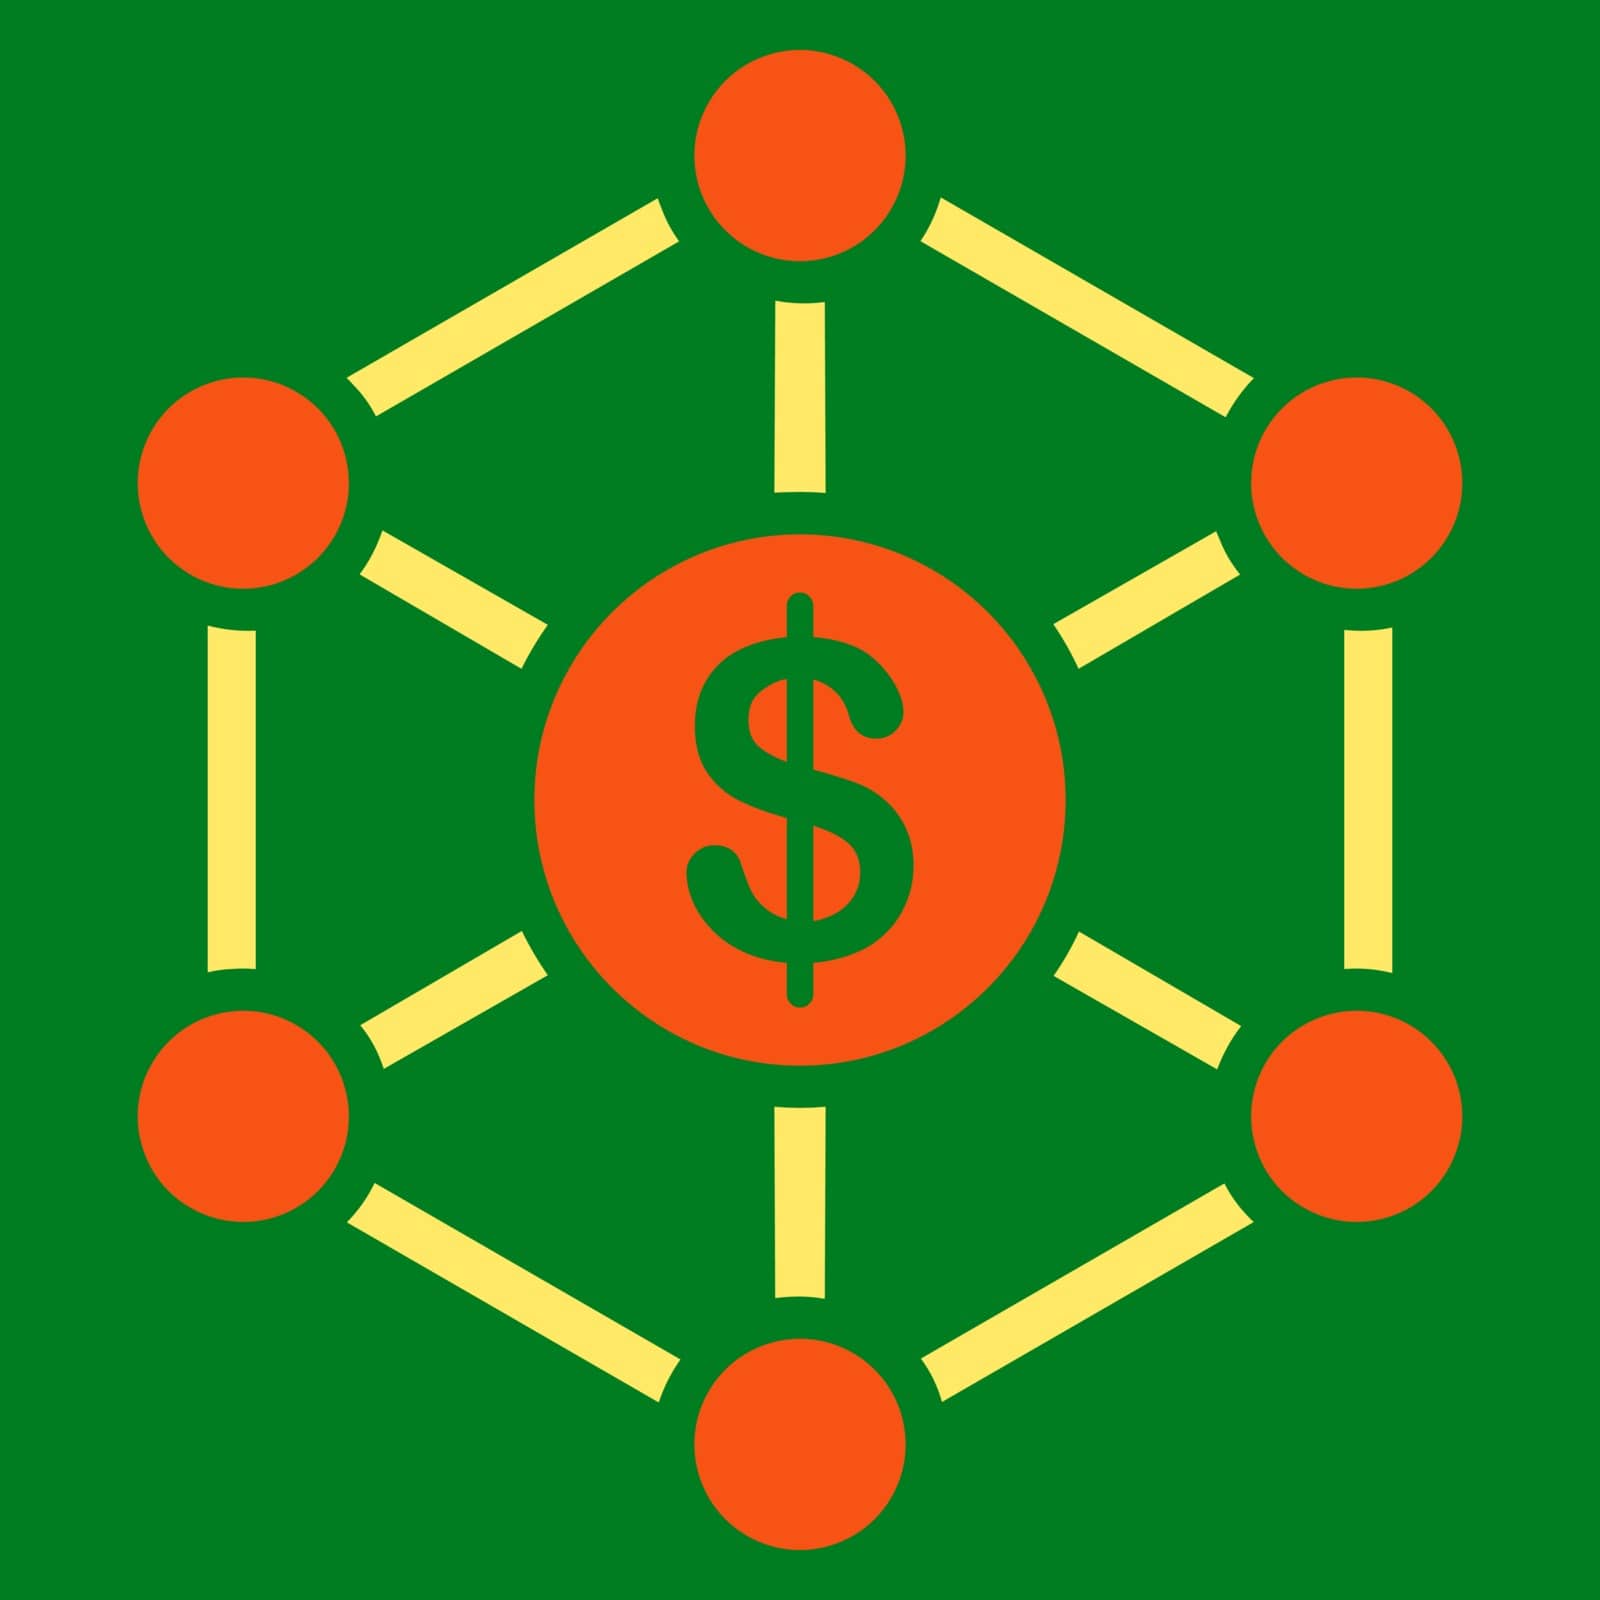 Scheme icon from Business Bicolor Set. This flat vector symbol uses orange and yellow colors, rounded angles, and isolated on a green background.